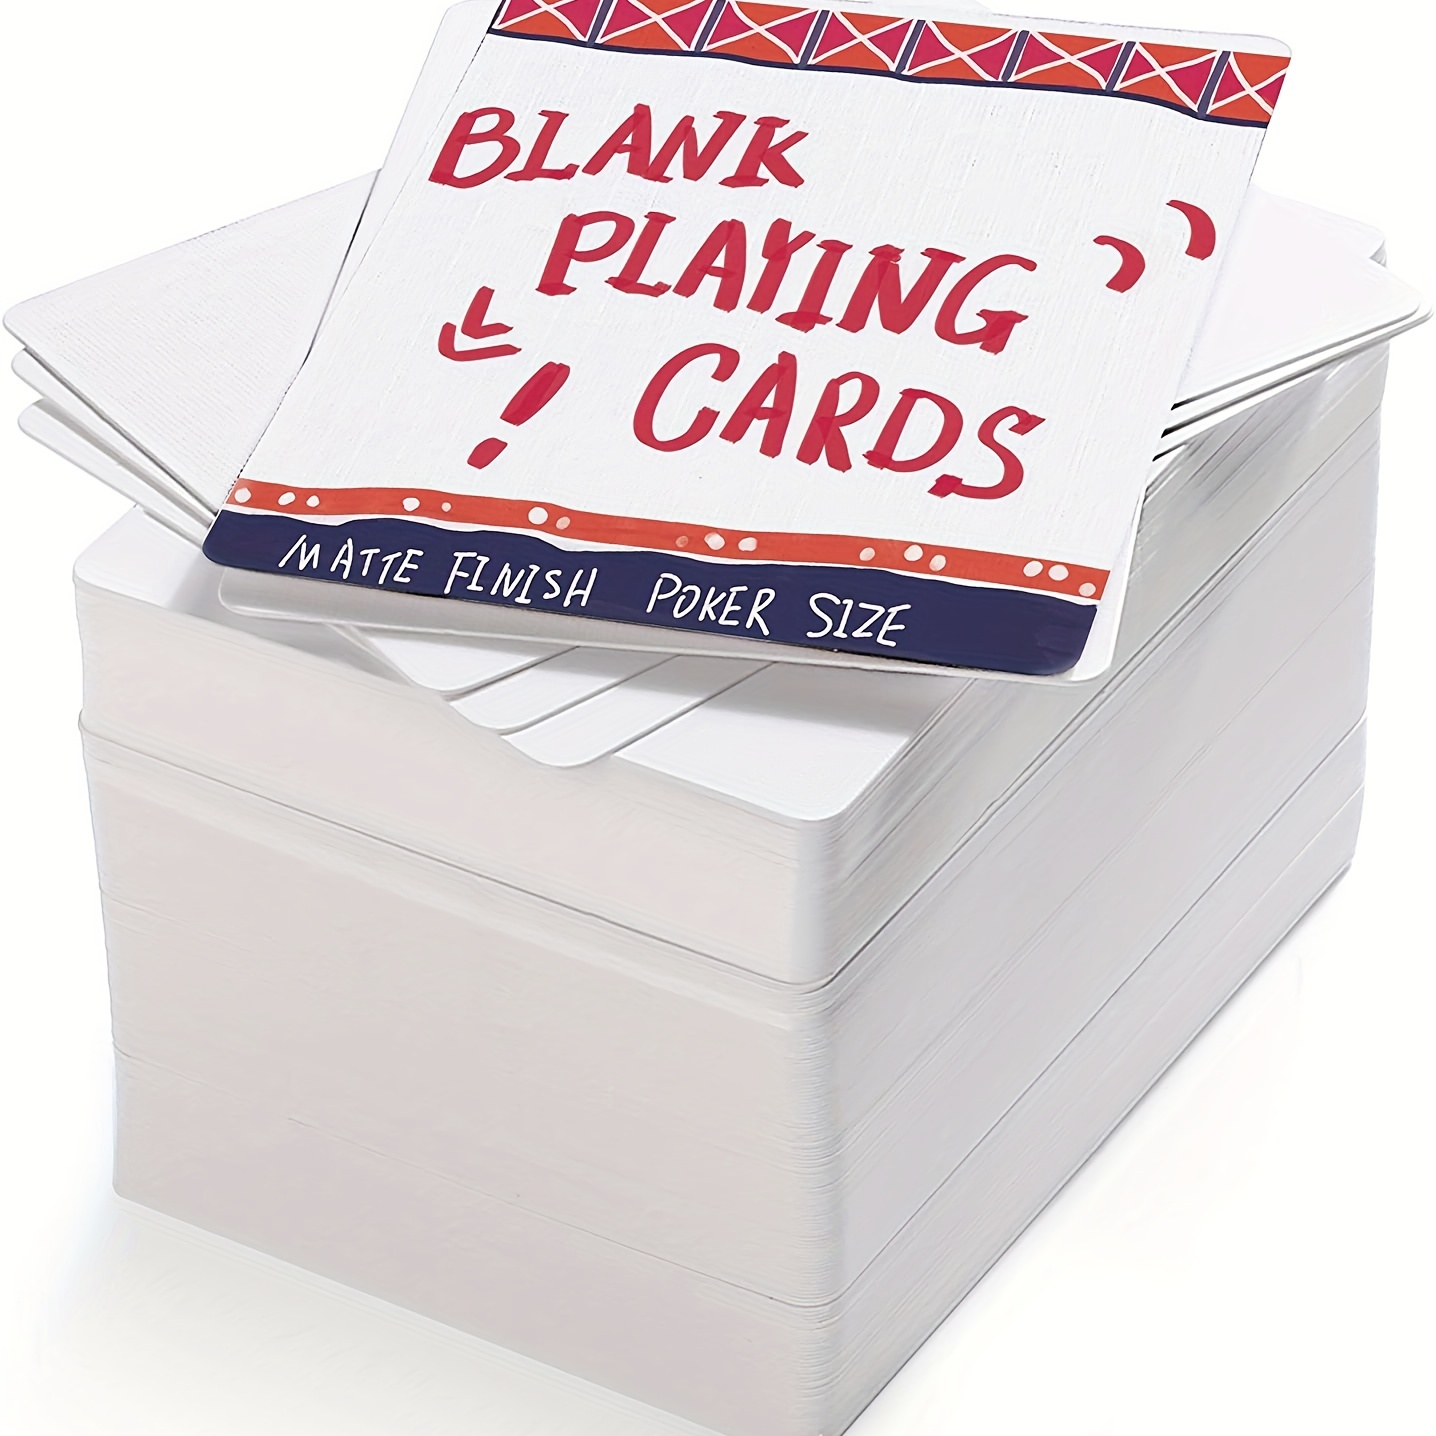 Large Size Blank Playing Cards Write On Board Game Cards - Temu